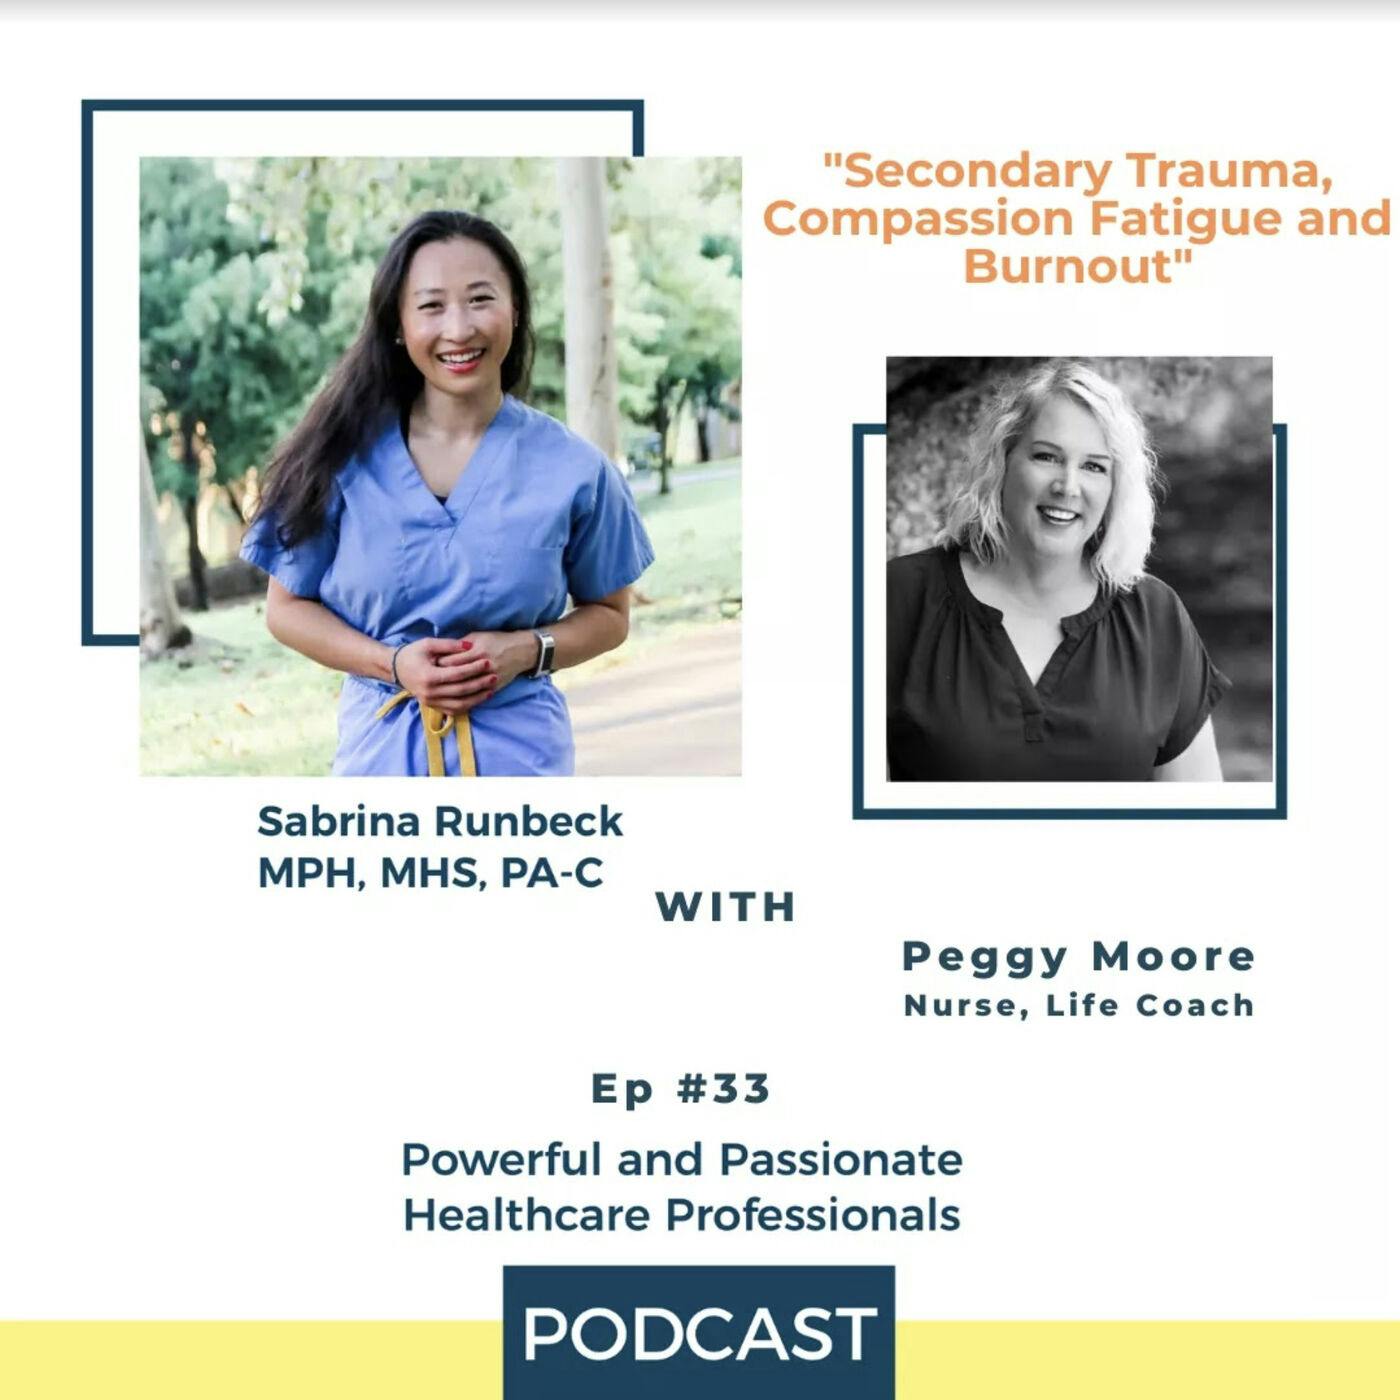 Ep 33 – Secondary Trauma, Compassion Fatigue and Burnout with Peggy Moore